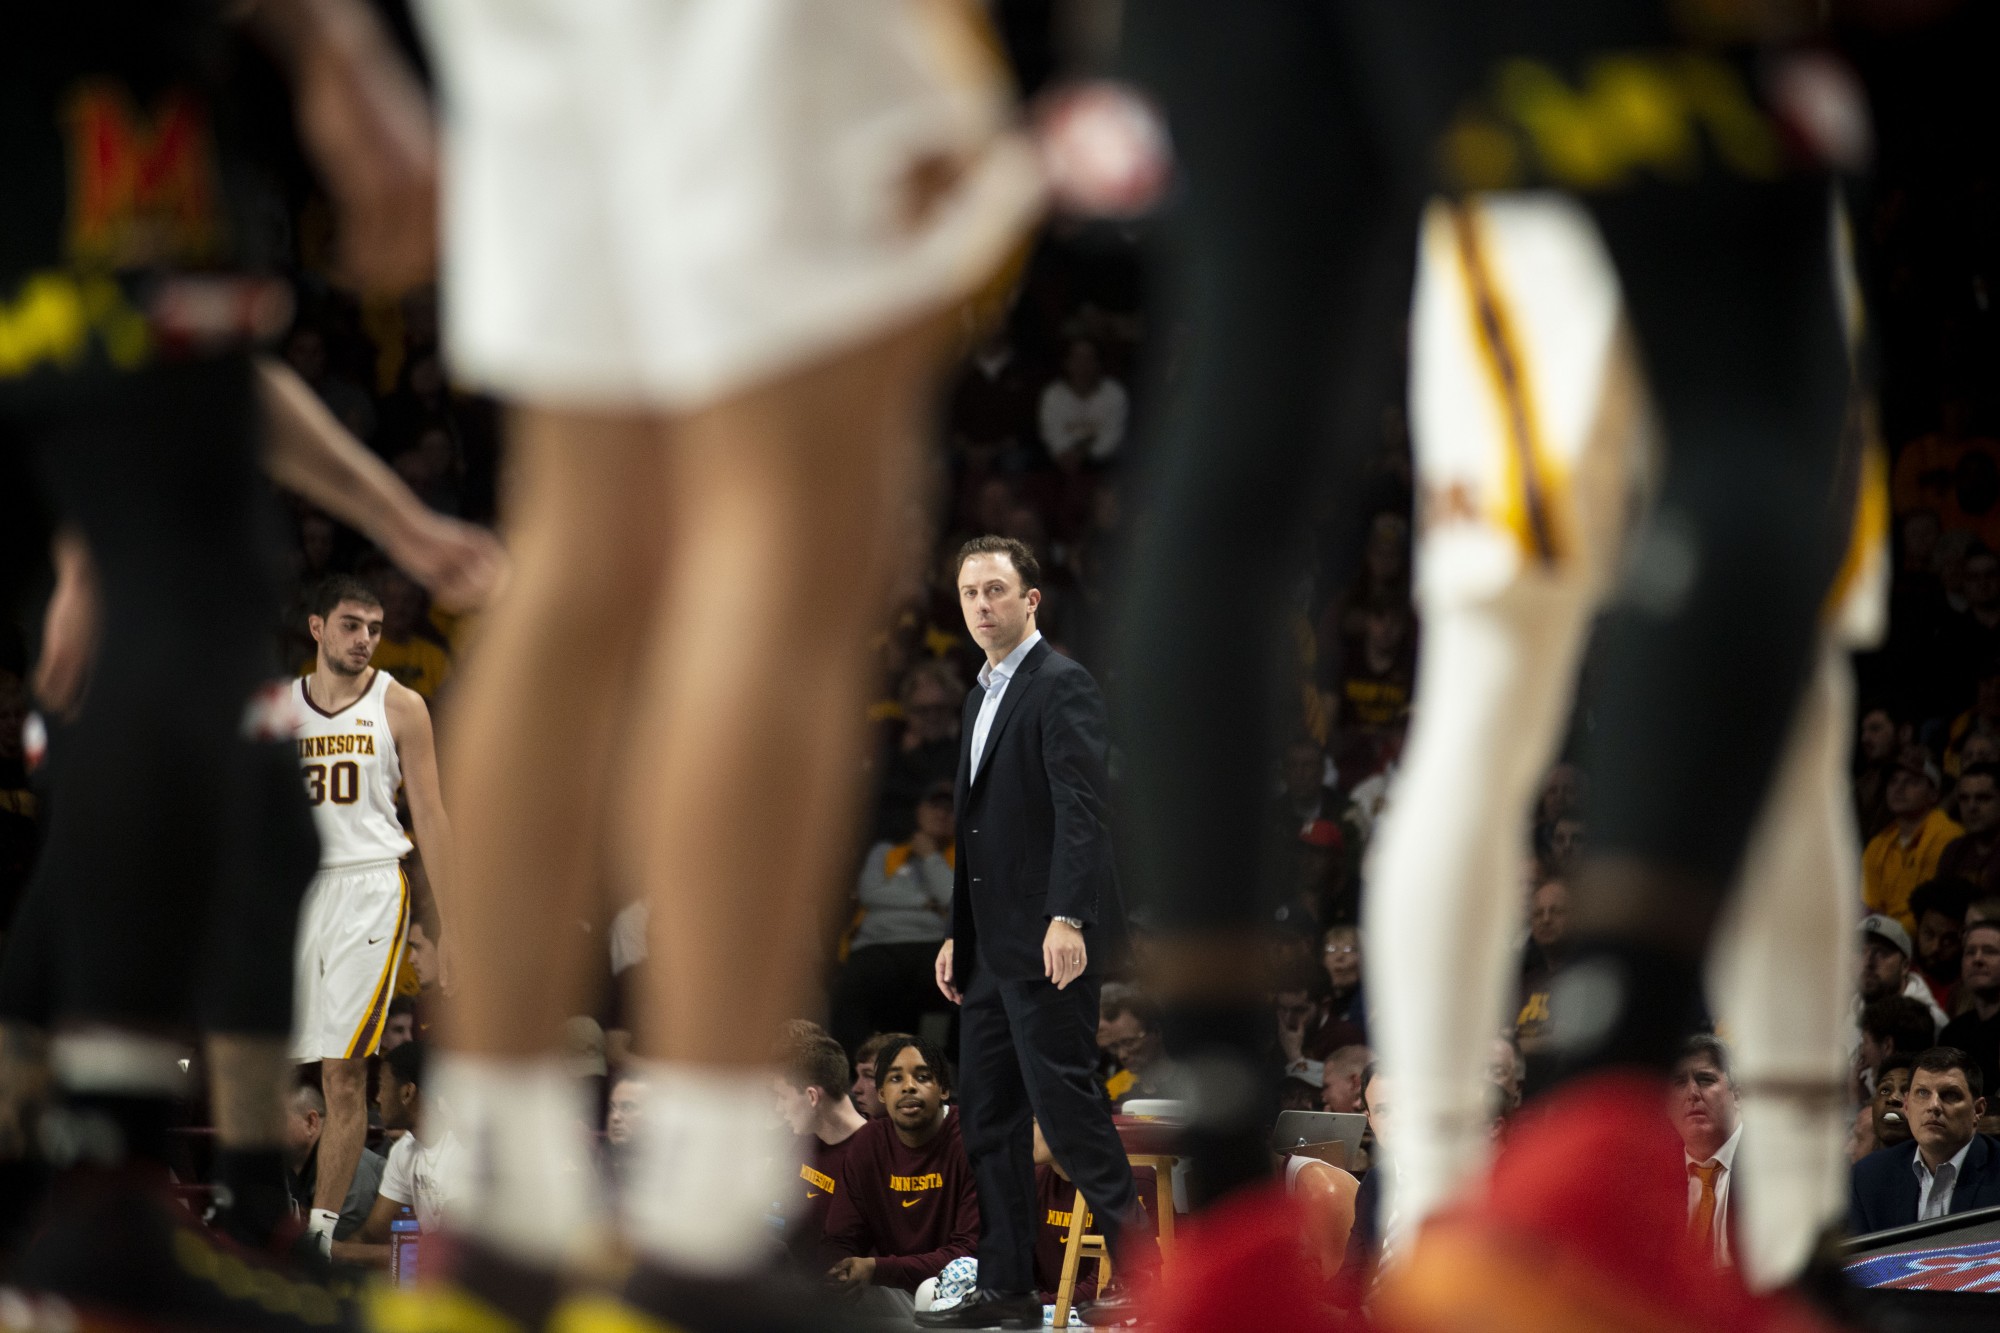 Head Coach Richard Pitino looks towards his team from the sidelines during a free throw attempt. The Gophers finished the half with a 47-31 lead over the Maryland Terrapins at Williams Arena on Weds, Feb. 26. (Parker Johnson / Minnesota Daily)